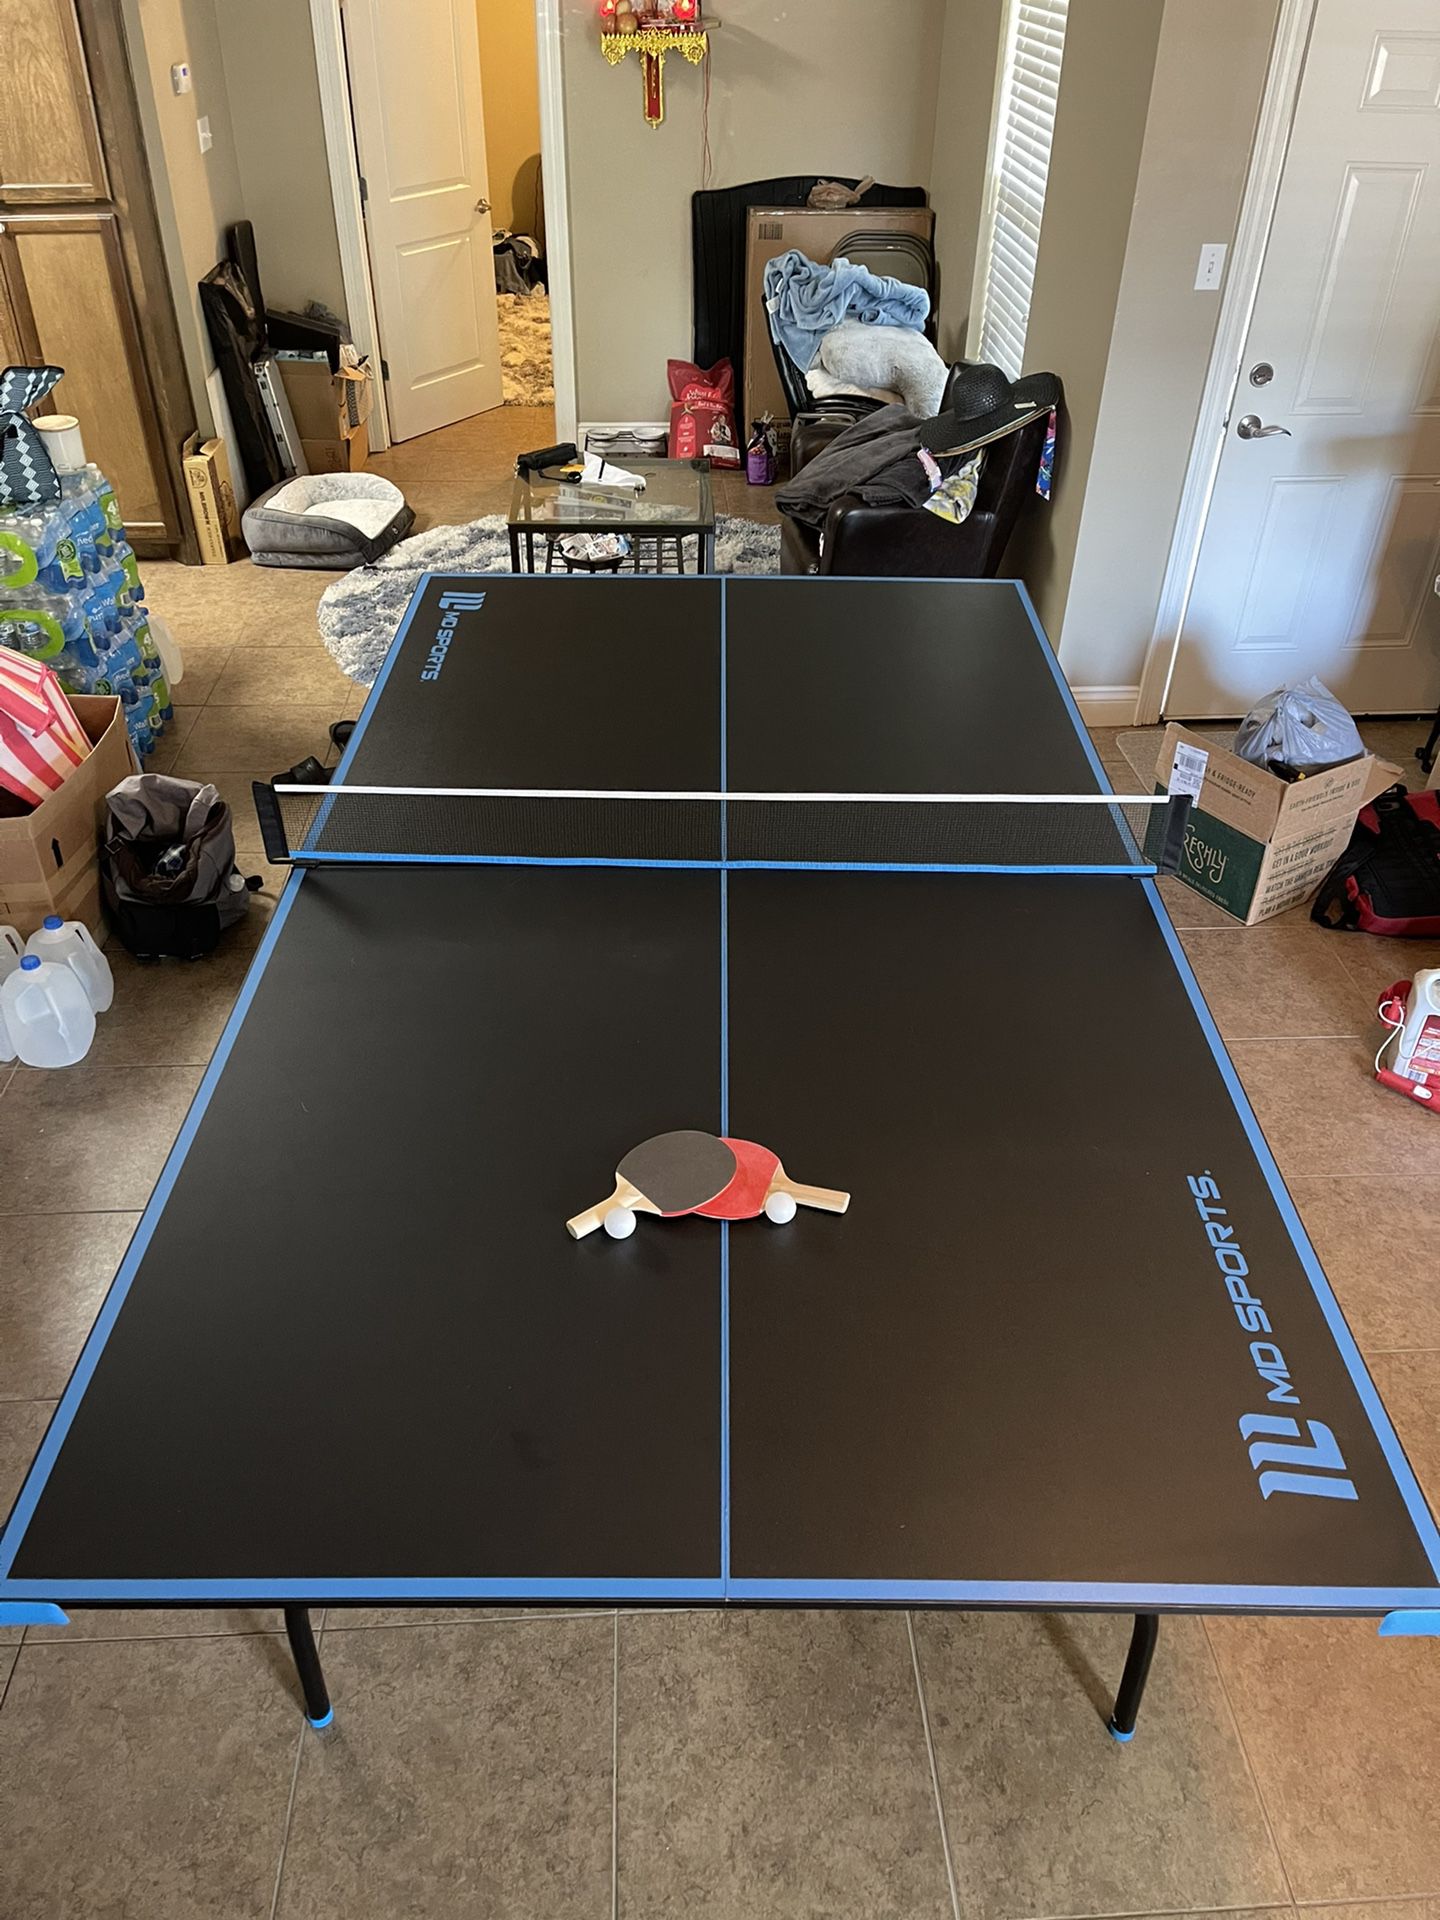 MD Sports Ping Pong Table